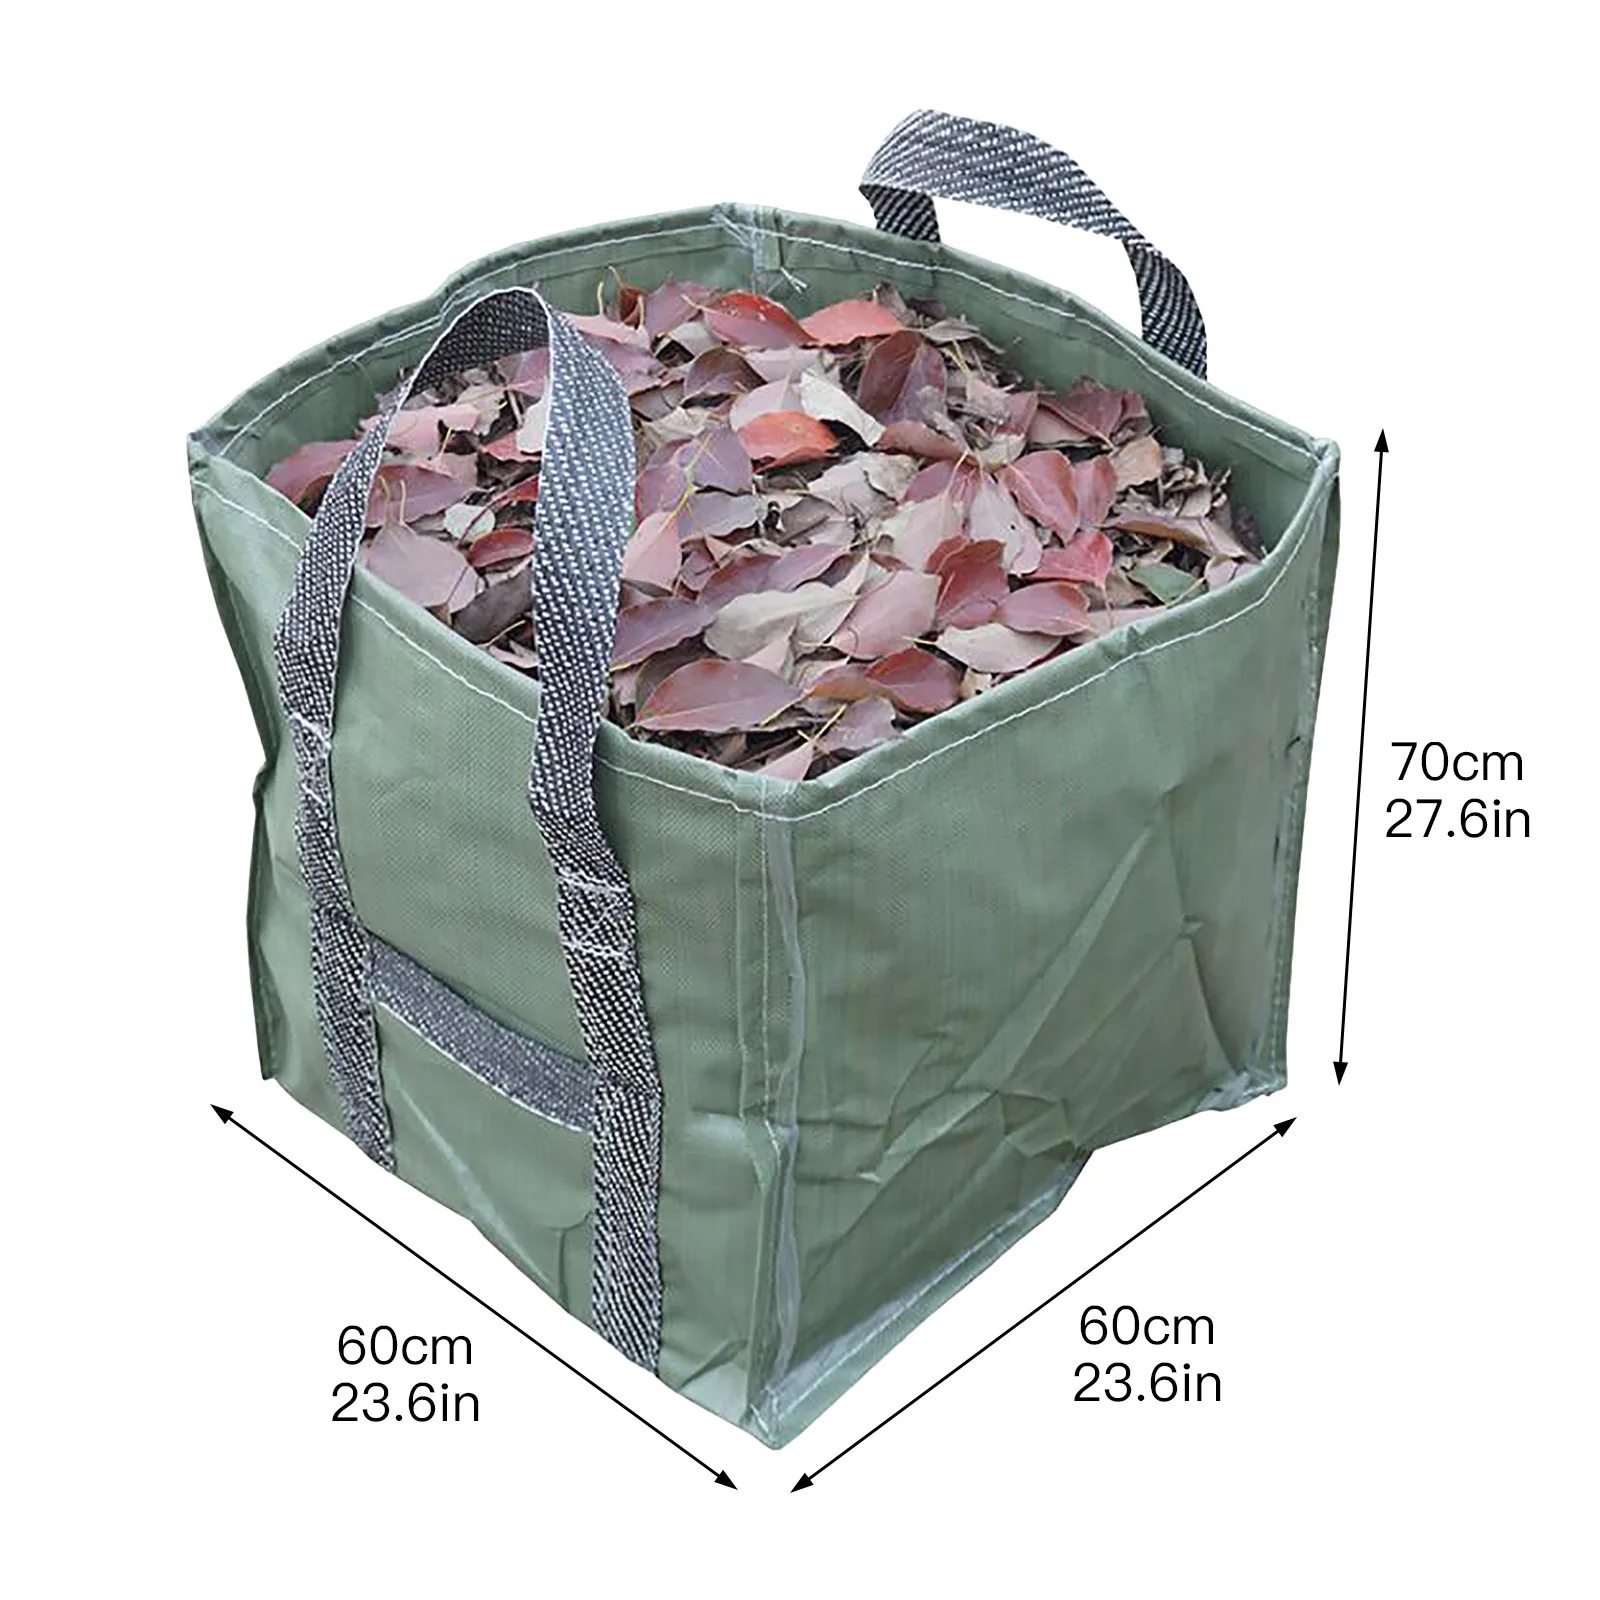 Collapsible Yard Garden Waste Bag up Leaf Bin Container for Home Outdoor 